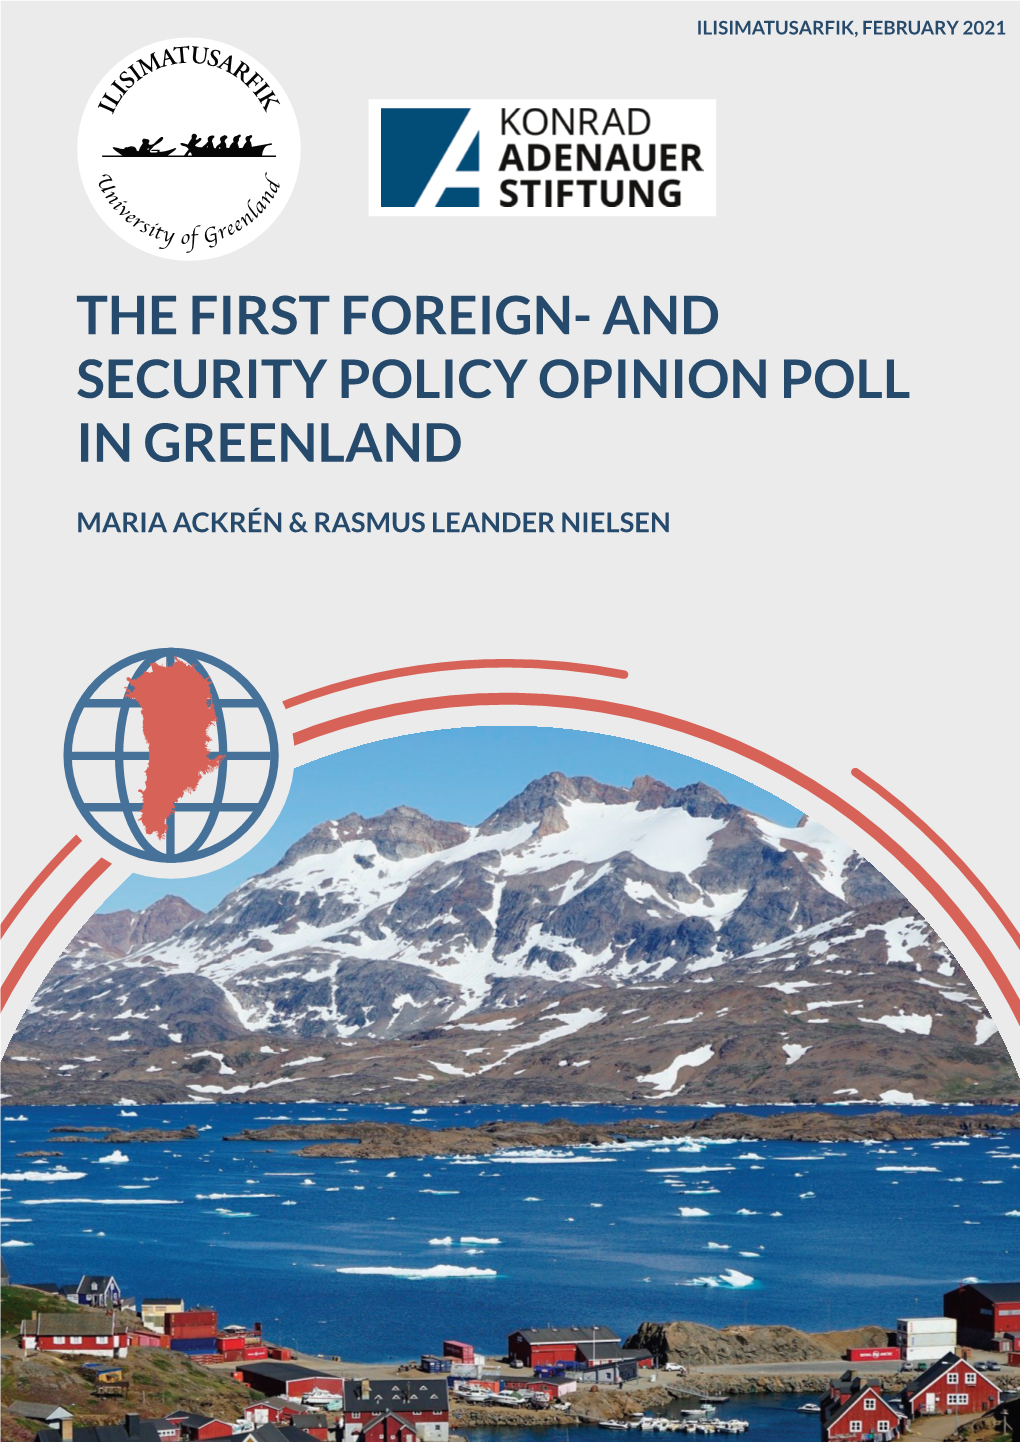 Download "The First Foreign- and Security Policy Opinion Poll In